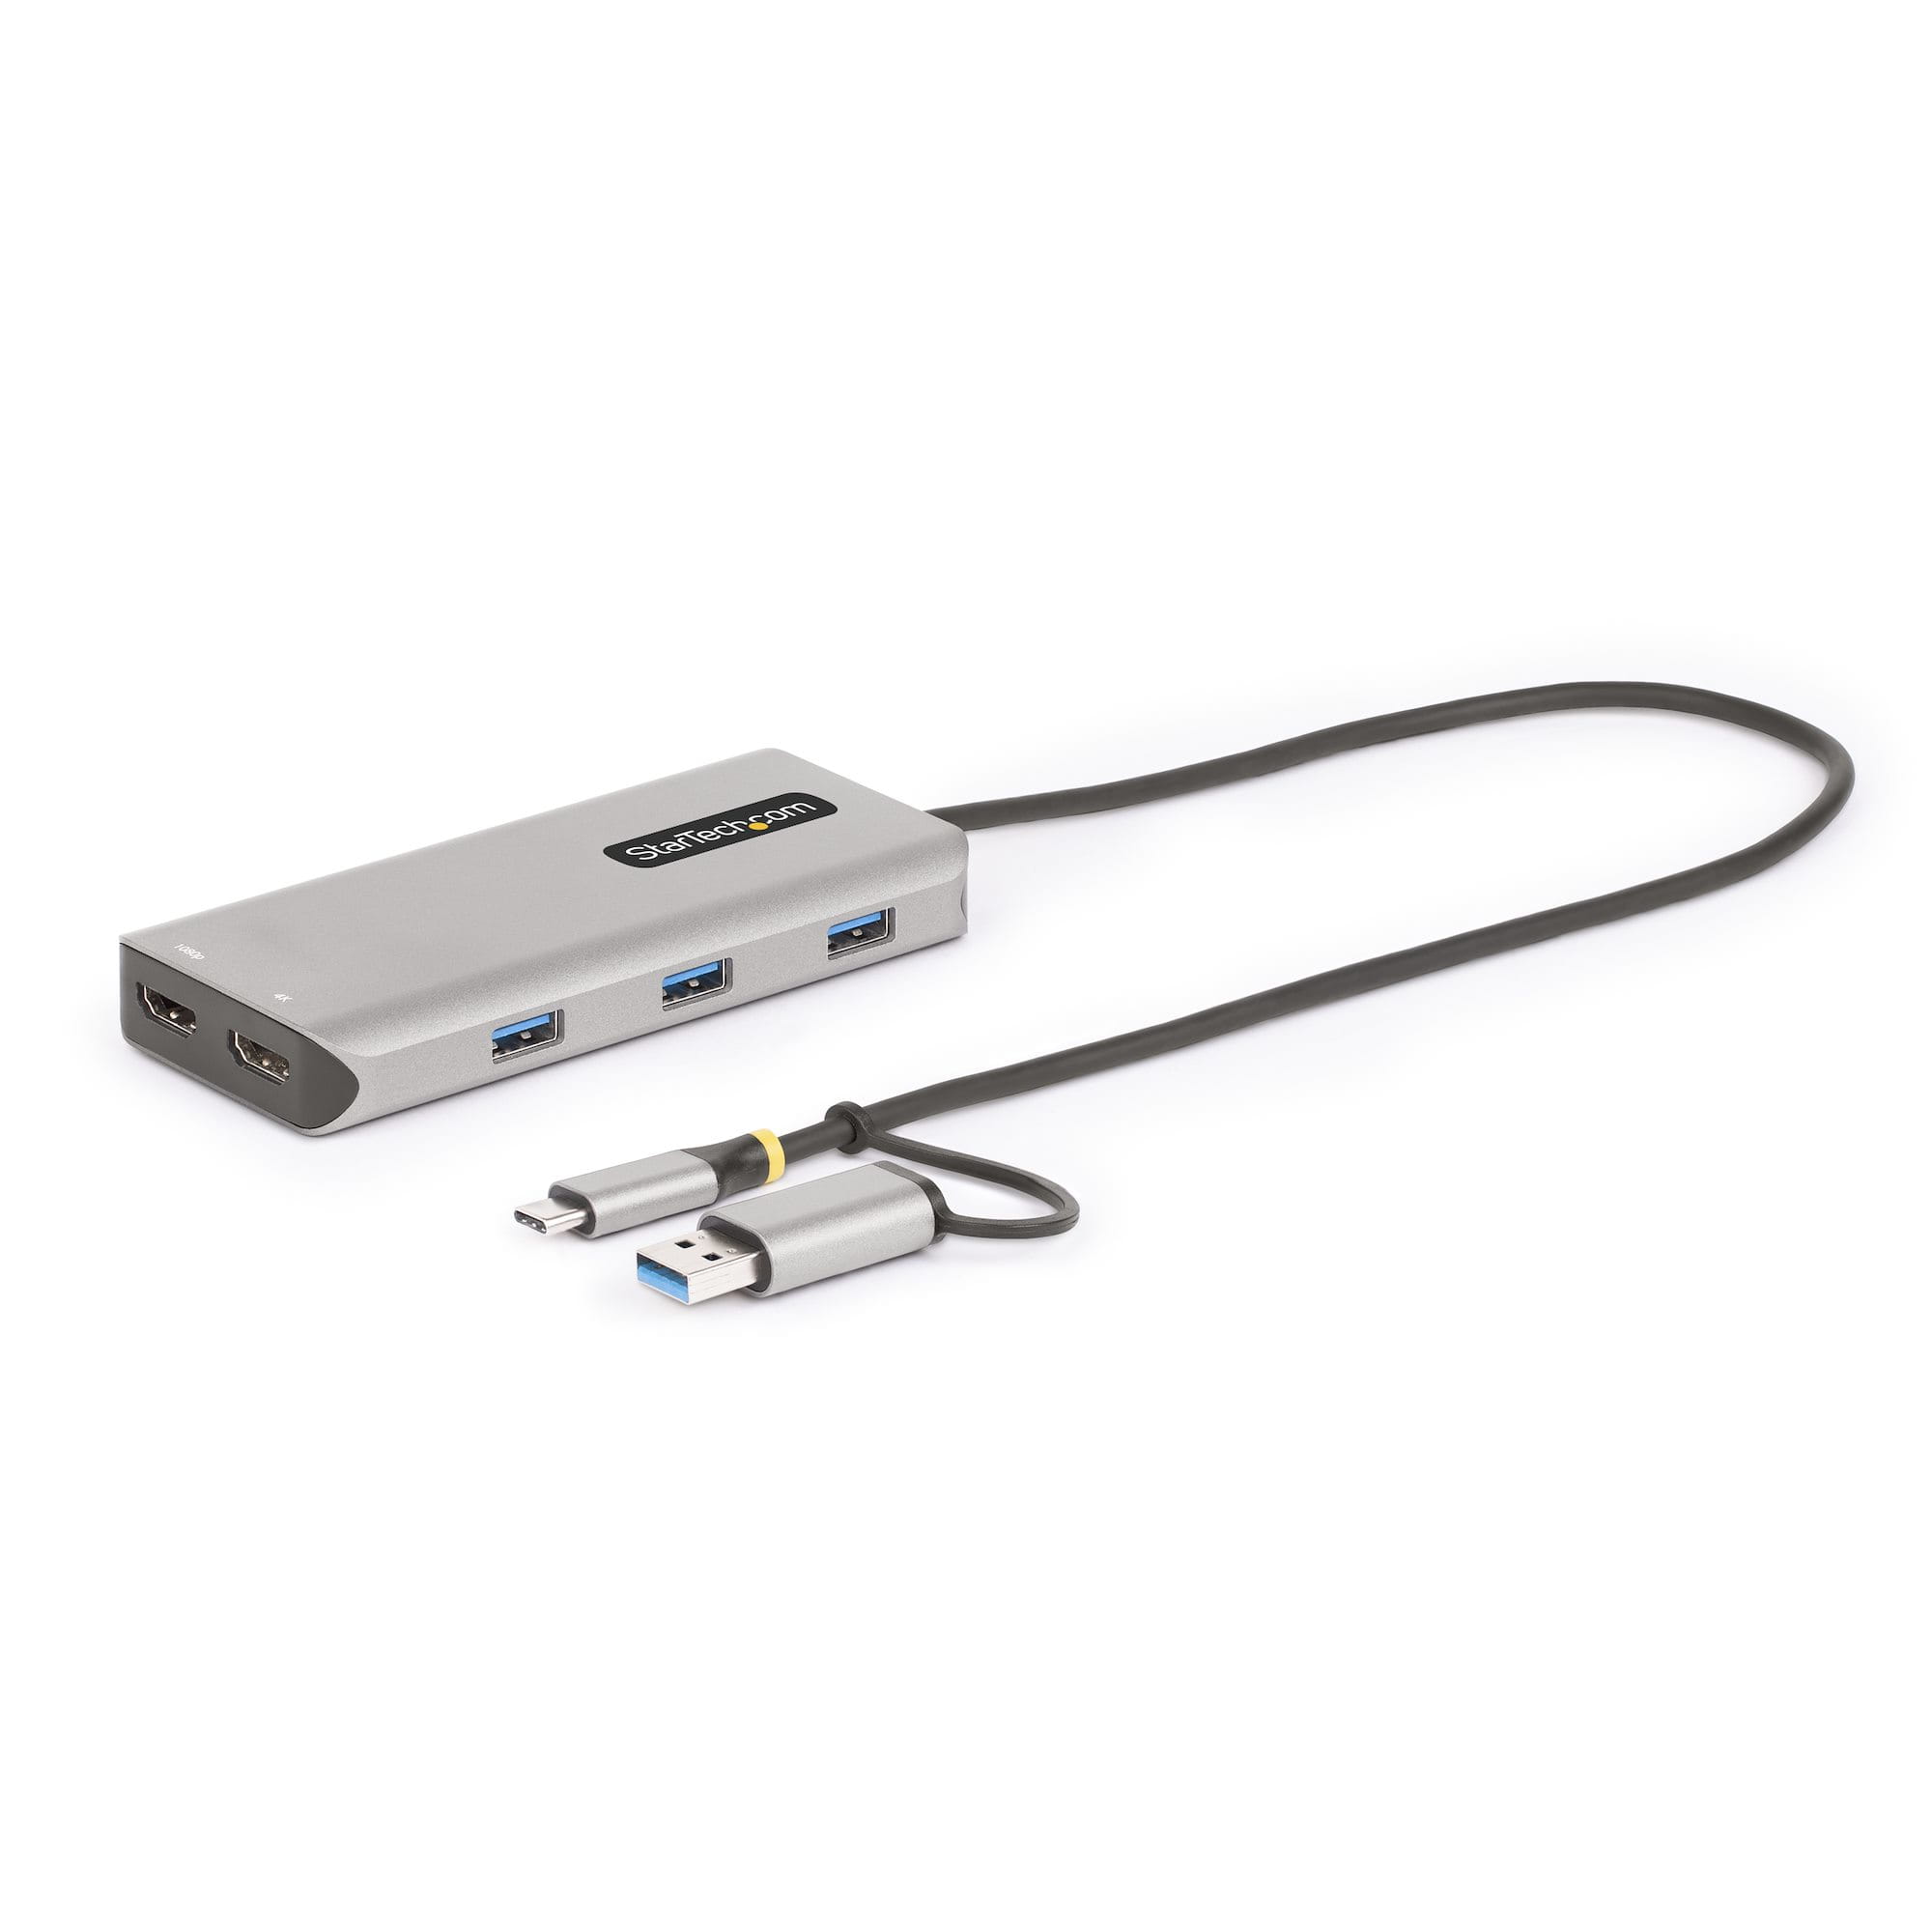 StarTech.com USB-C Multiport Adapter w/Attached USB-C to USB-A Dongle, Dual HDMI (4K30Hz/1080p60Hz)